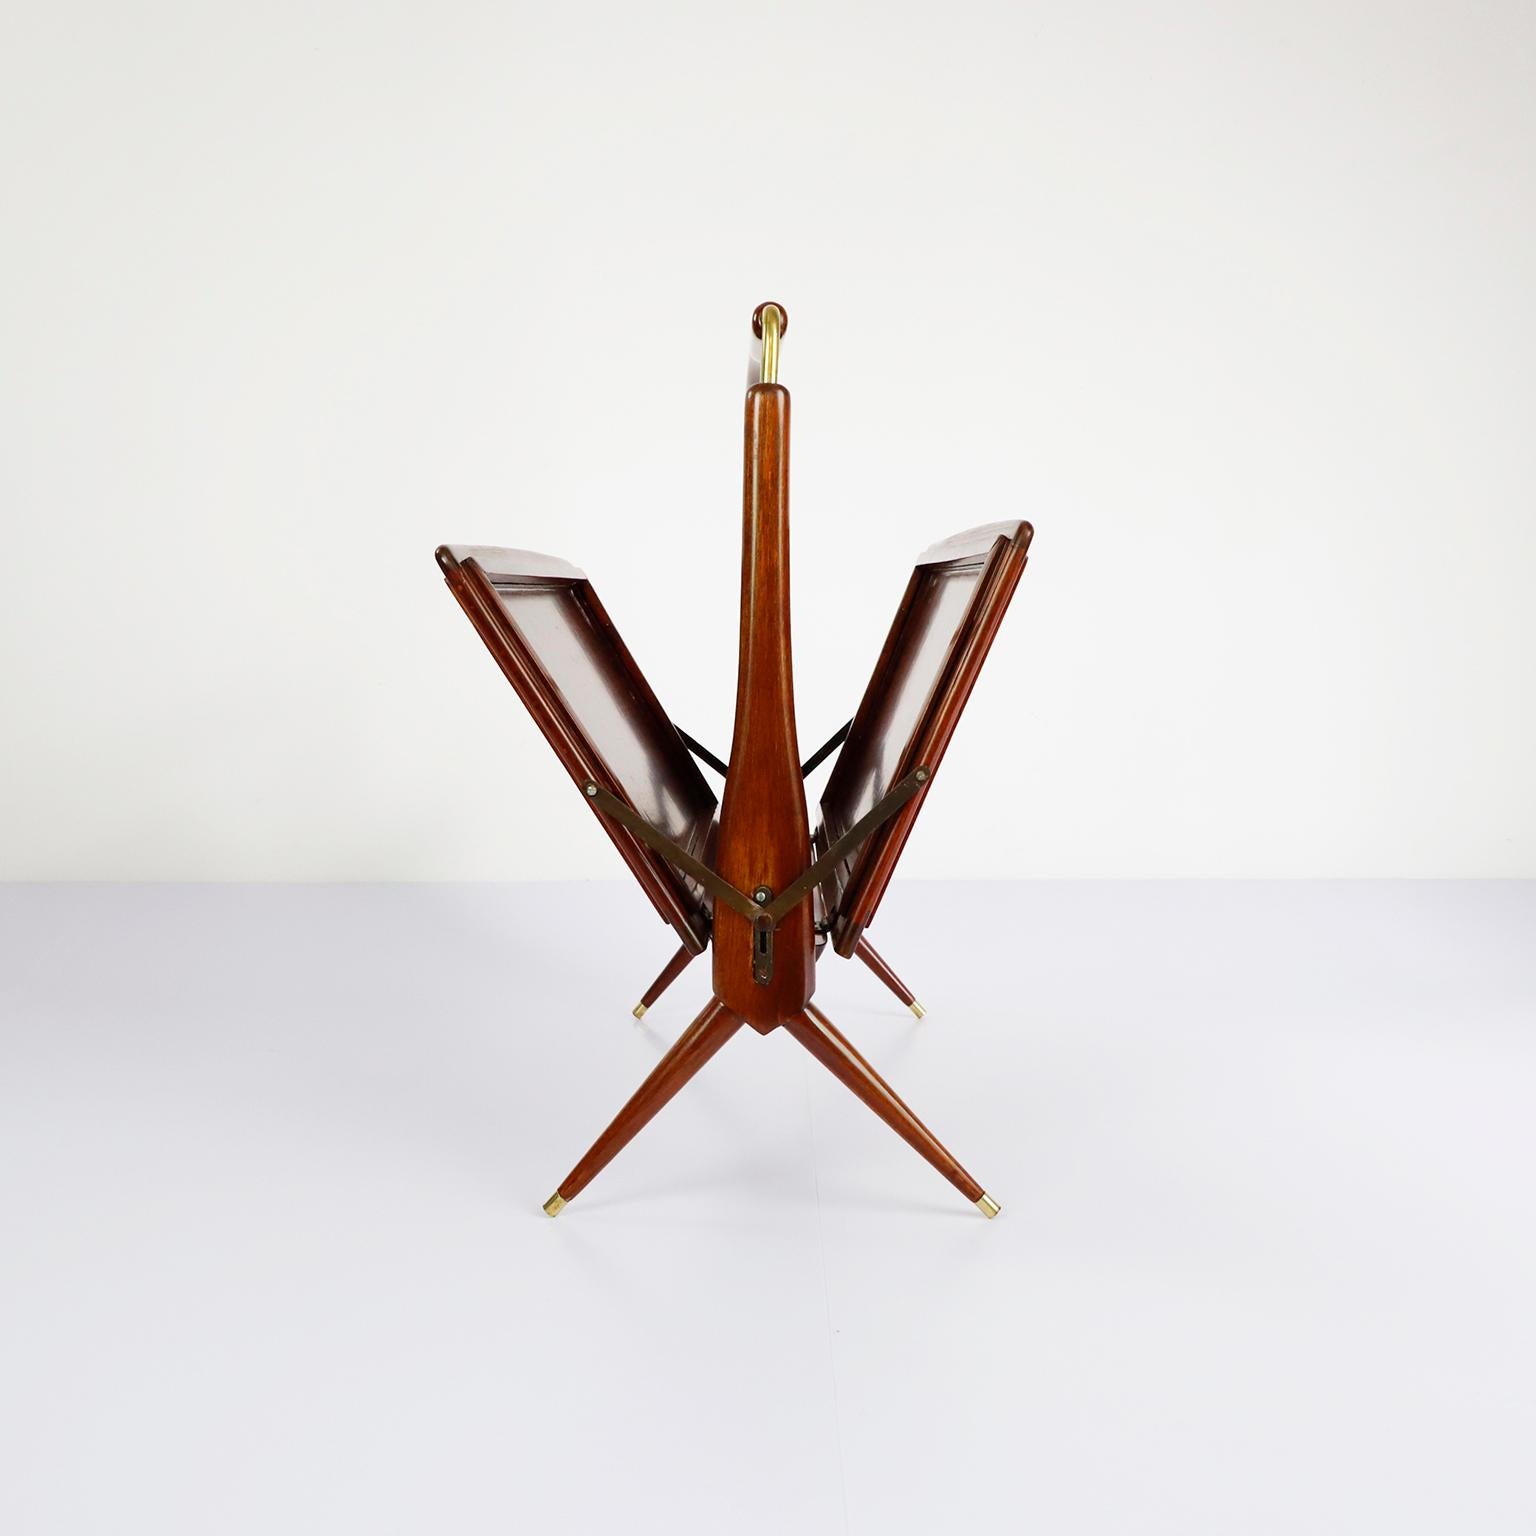 We offer this folding magazine rack in mahogany wood and brass details, circa 1950.